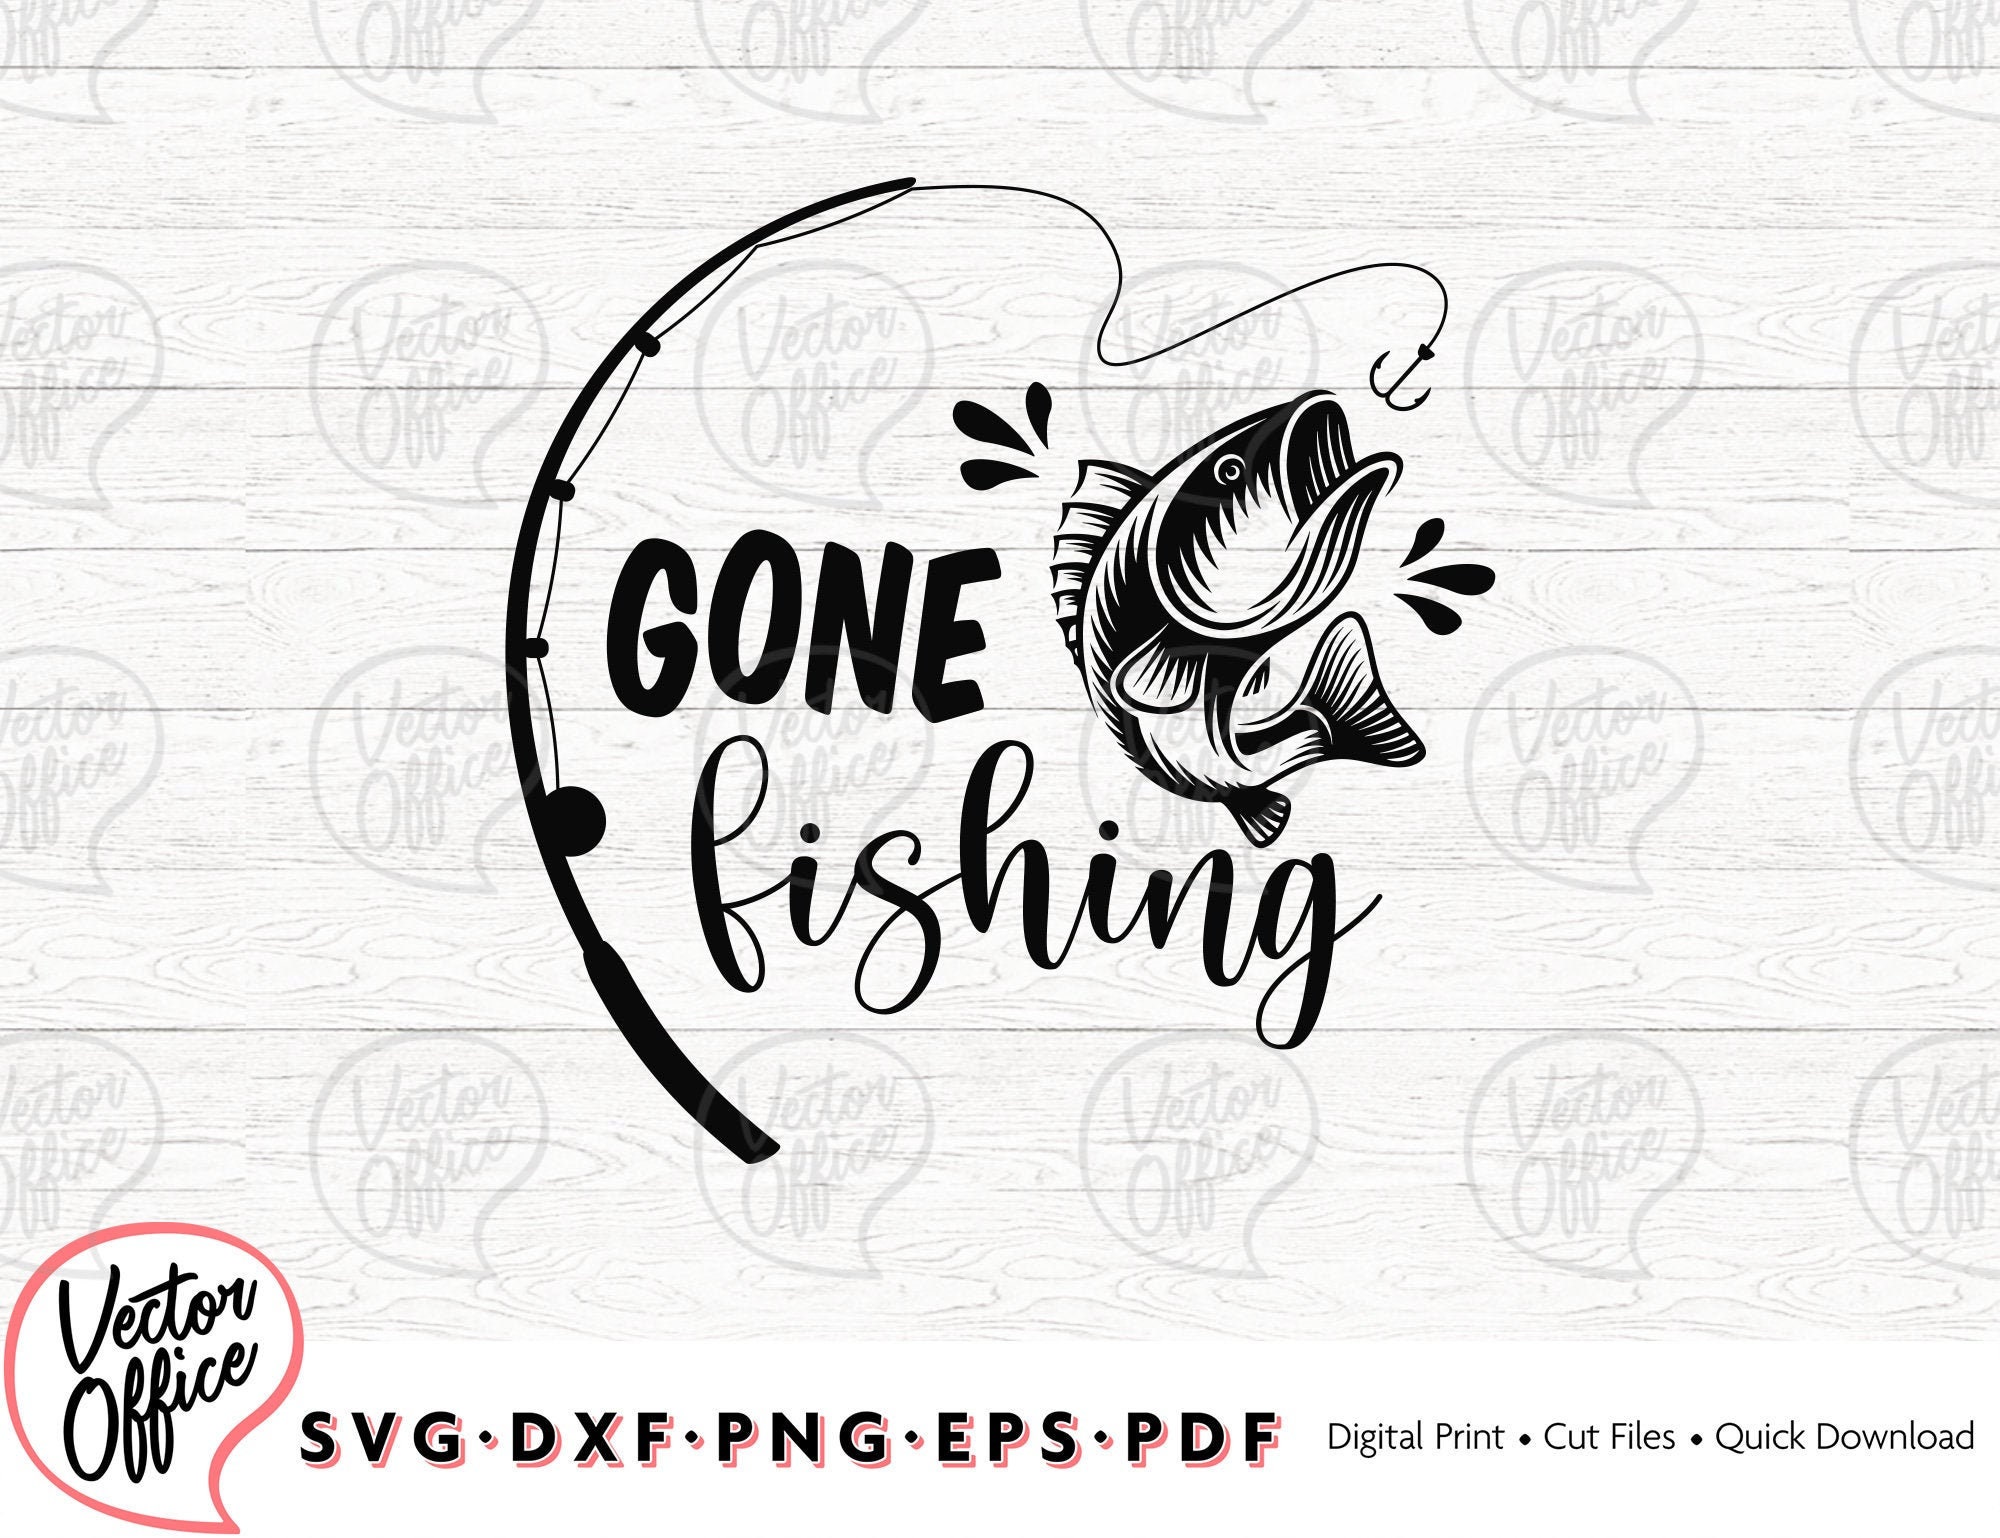 Gone Fishing svg, fishing svg, Fishing Cilpart Vector for Silhouette Cricut  Cutting Machine Design Download Svg, Dxf, Png, Pdf, Eps